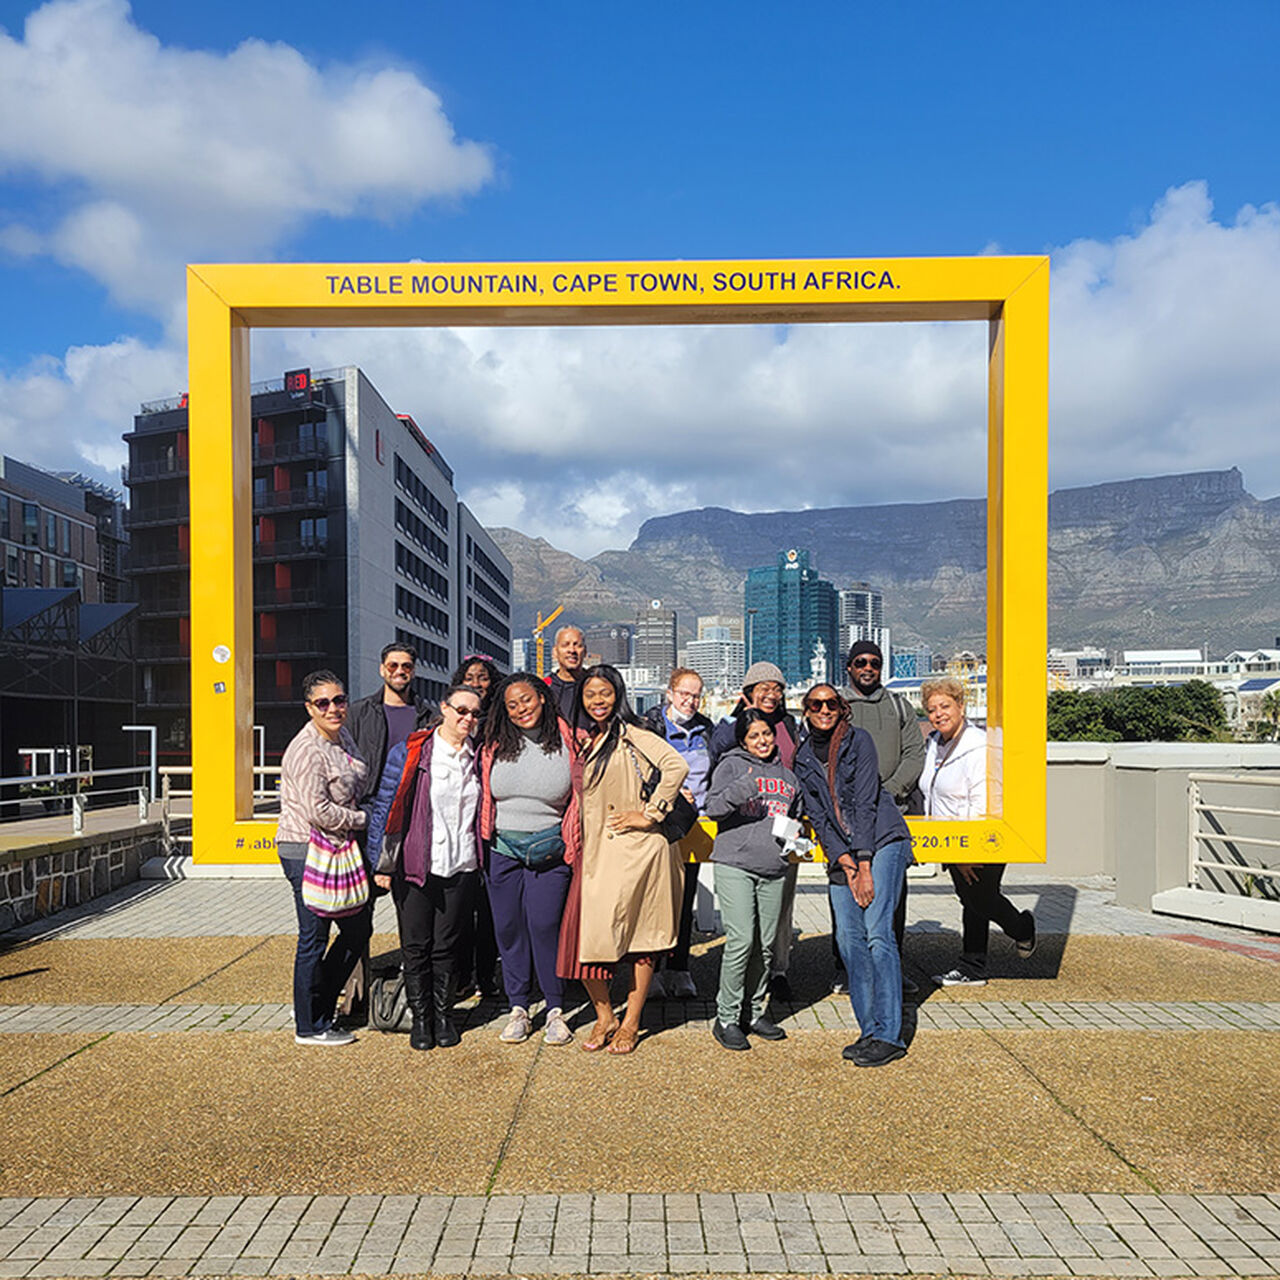 People standing outside in front of a sign for Table Mountain, Cape Town, South Africa image number 0